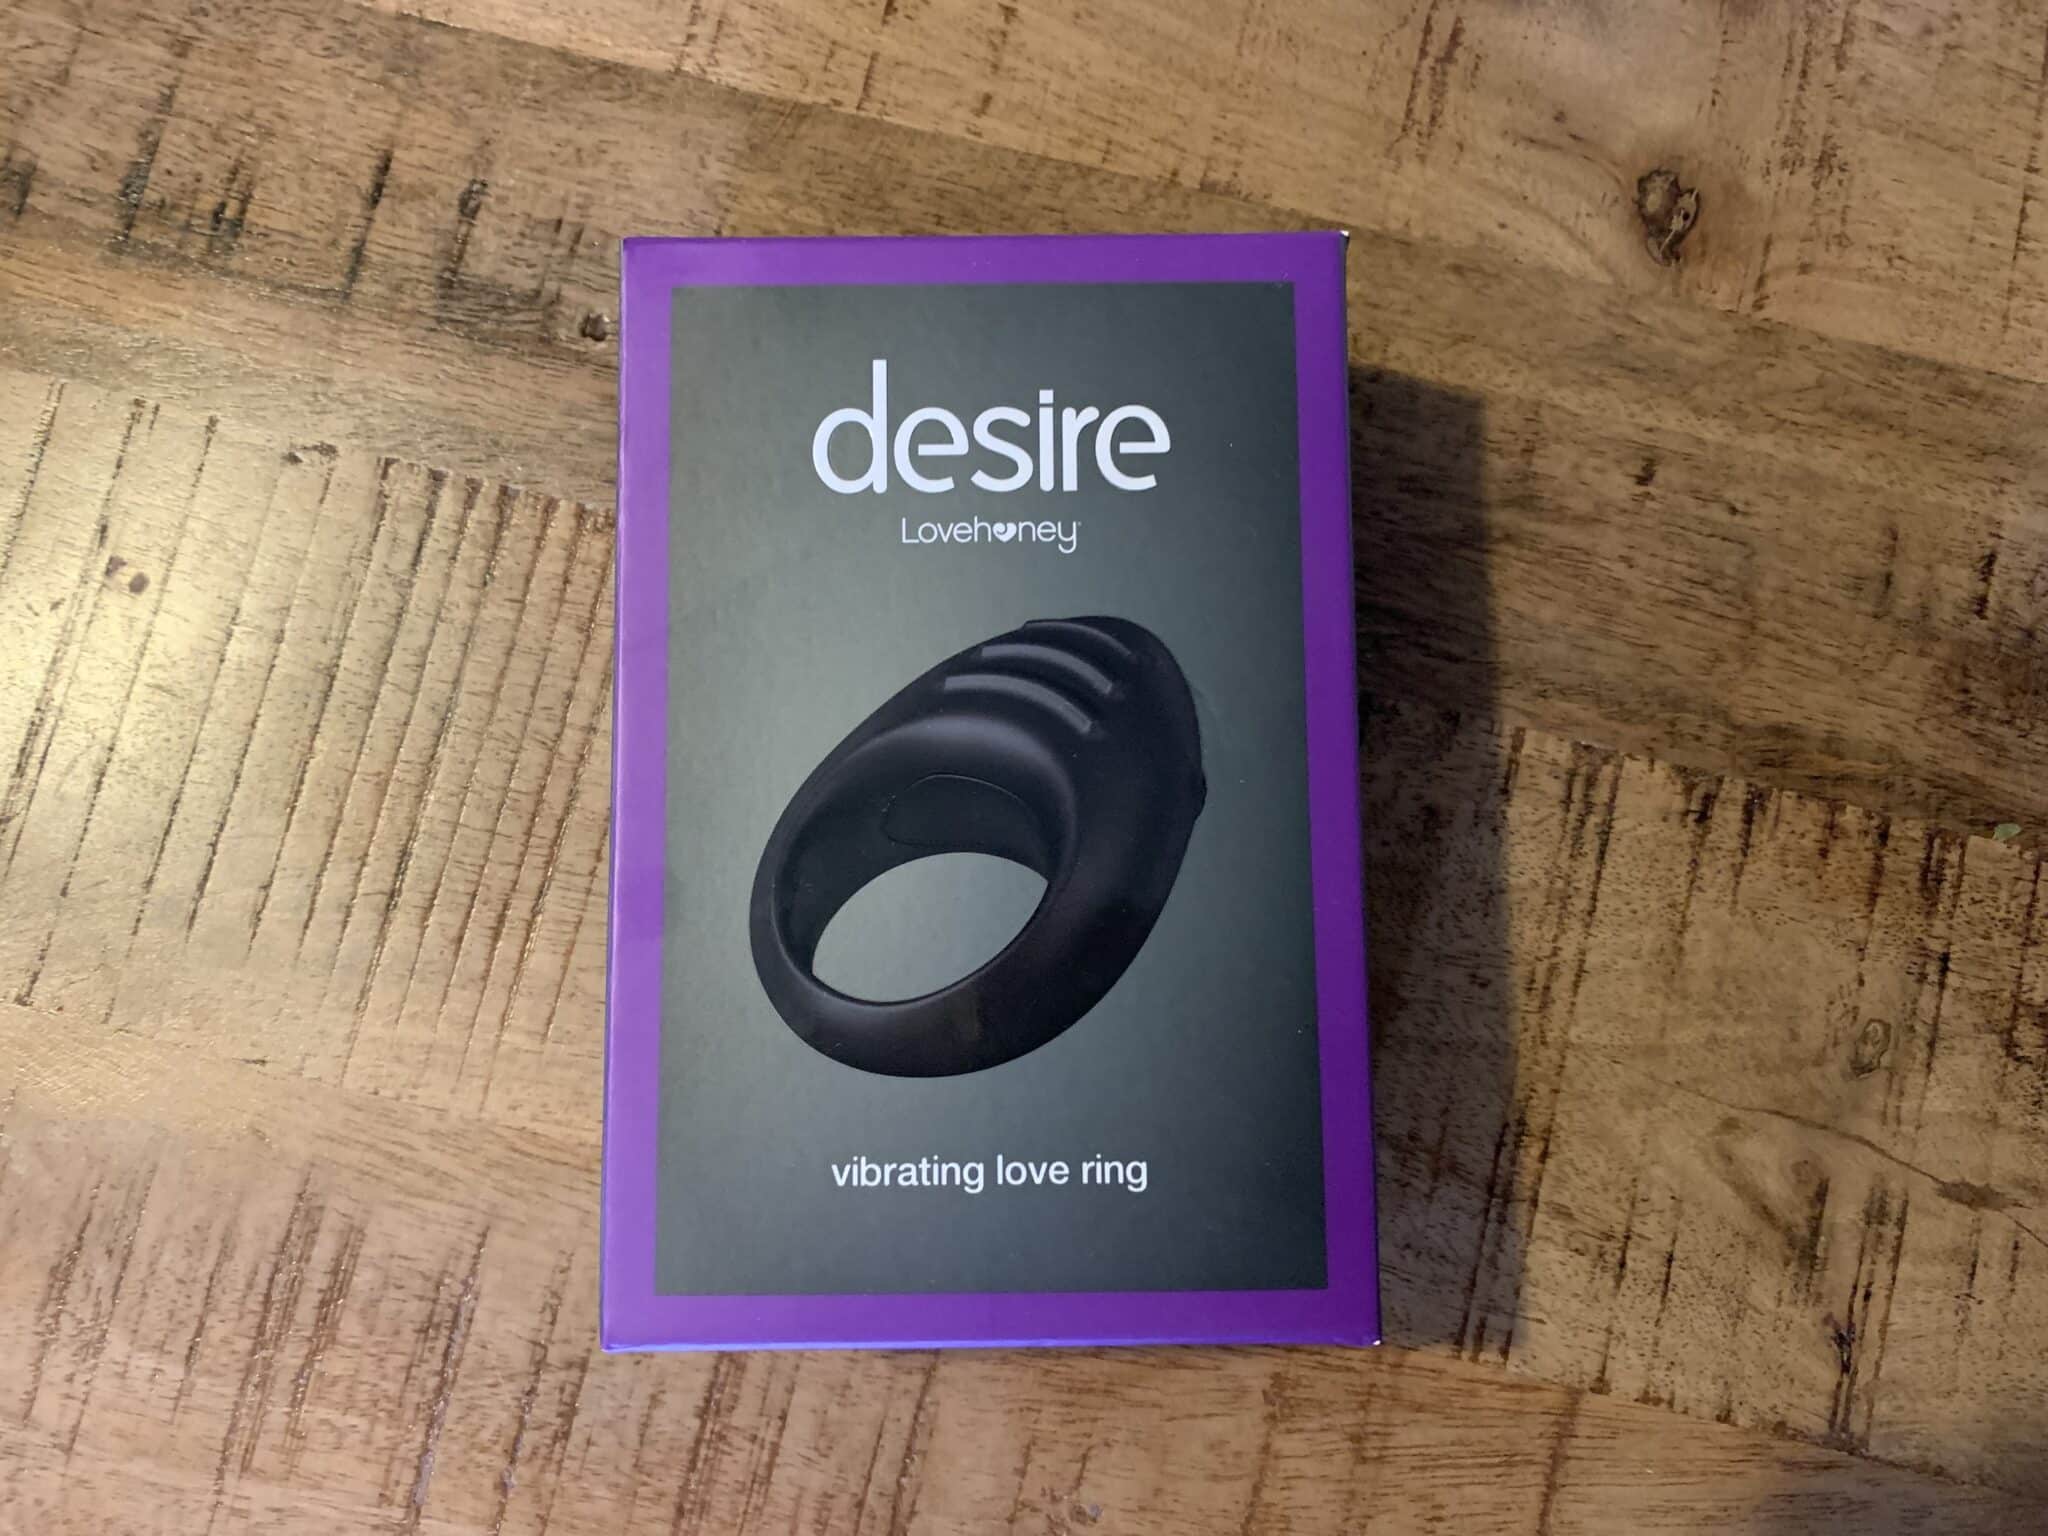 Lovehoney Desire Luxury Vibrating Cock Ring Packaging: An Unsung Hero?